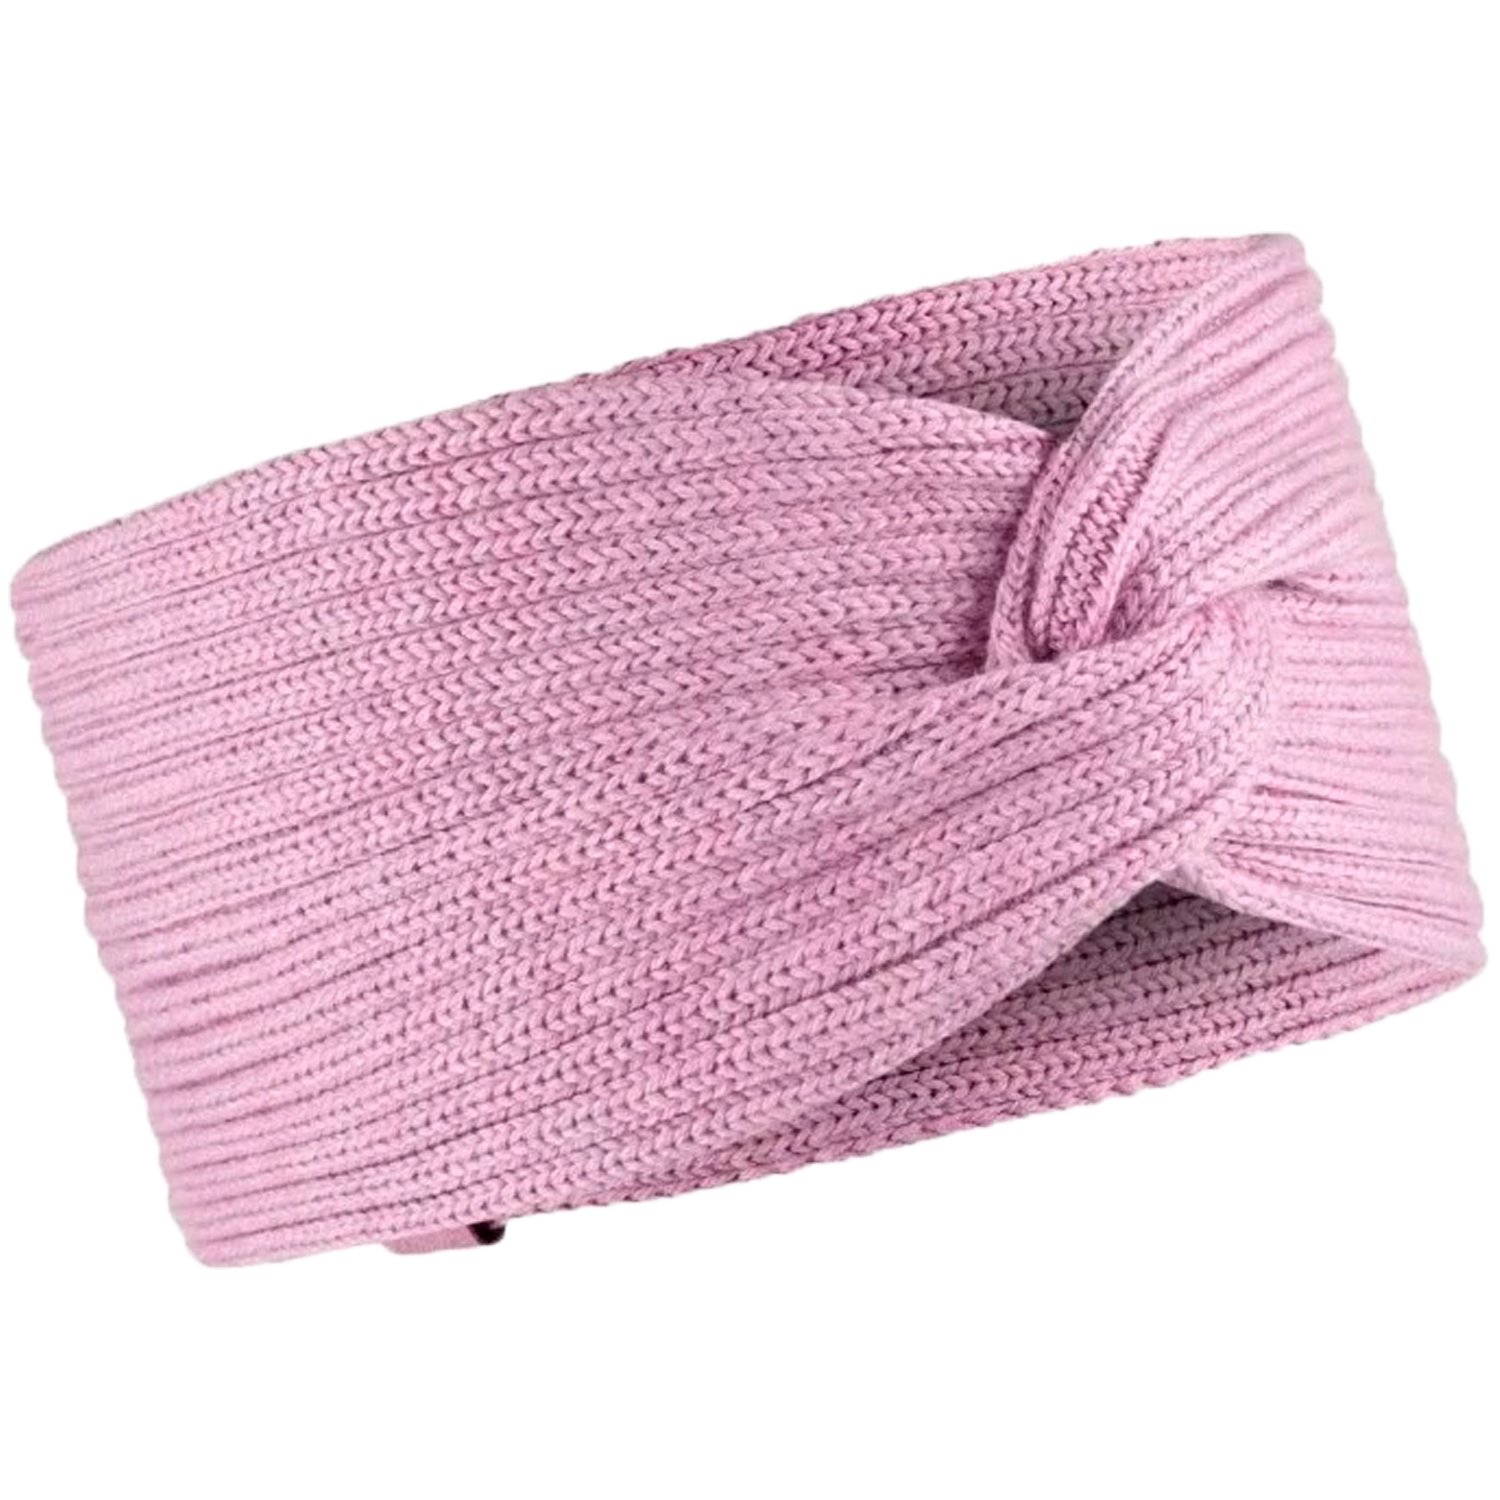 Повязка Buff Knitted Headband Norval Pansy, женский, 126459.601.10.00 шапка buff knitted hat norval pansy us one size 124242 601 10 00